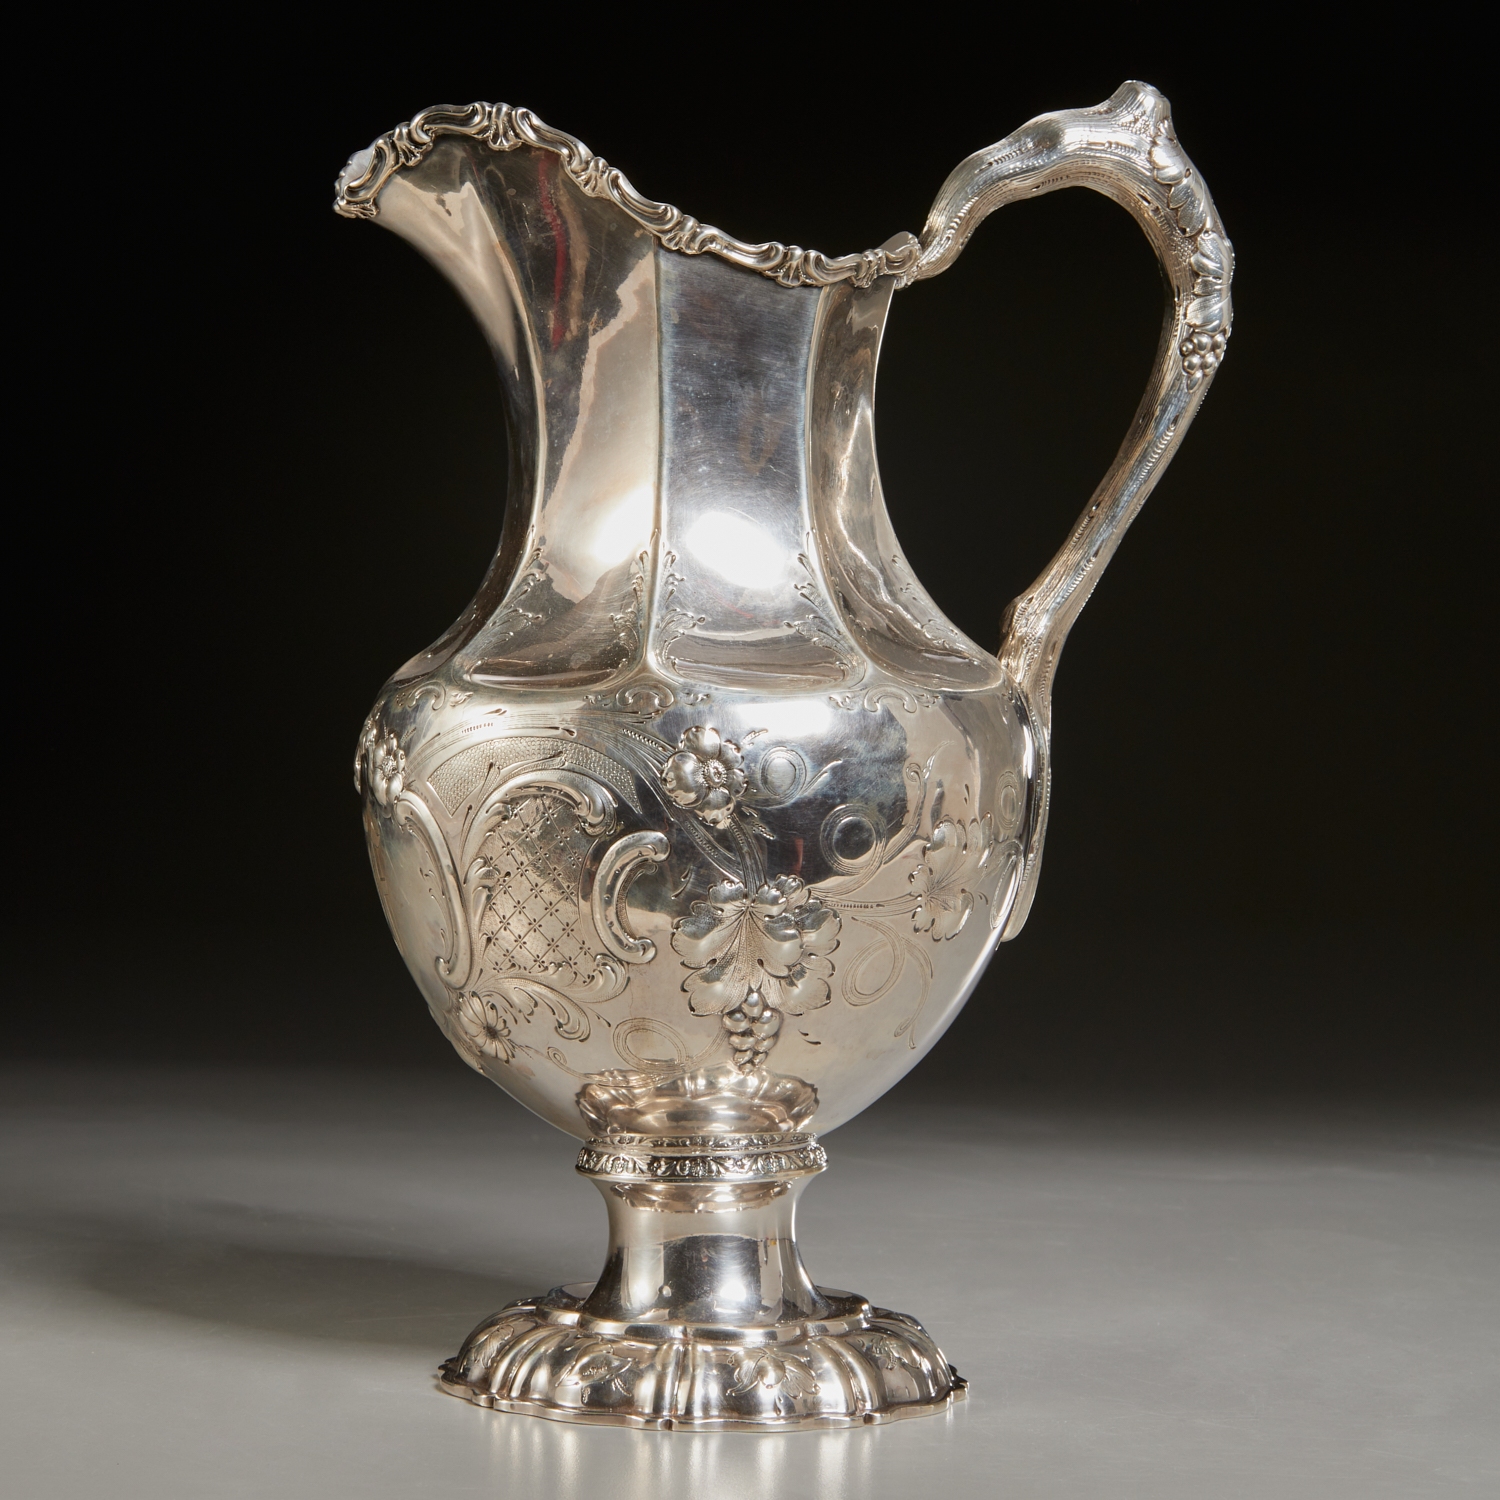 AMERICAN SILVER PITCHER WILLIAM 2bf69d